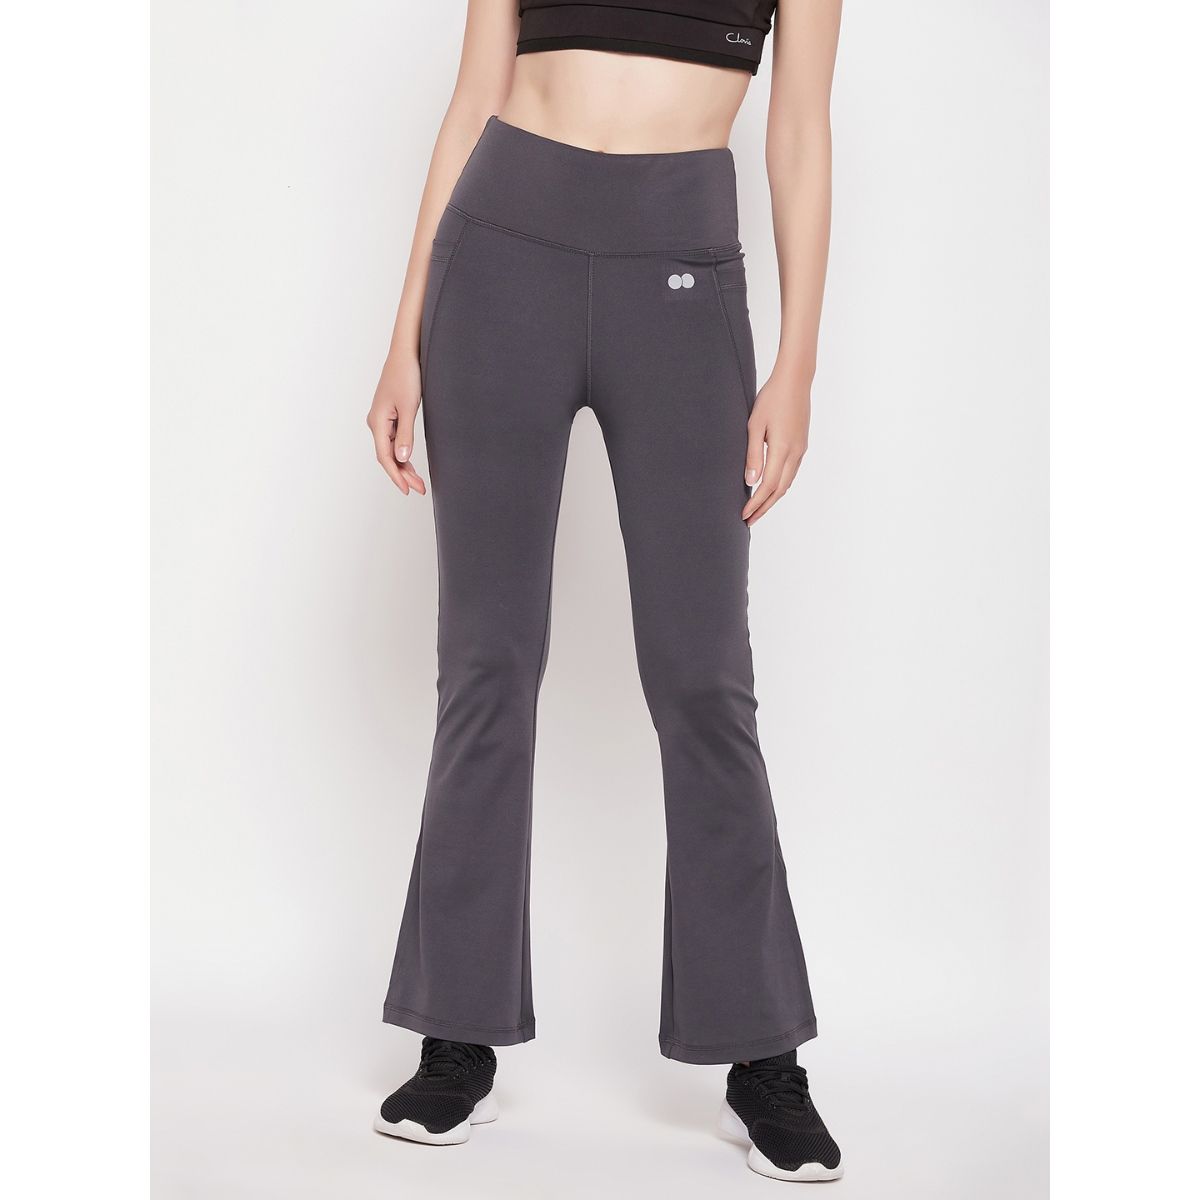 Buy Clovia Comfort Fit High Rise Flared Yoga Pants in Dark Grey with Side  Pockets Online